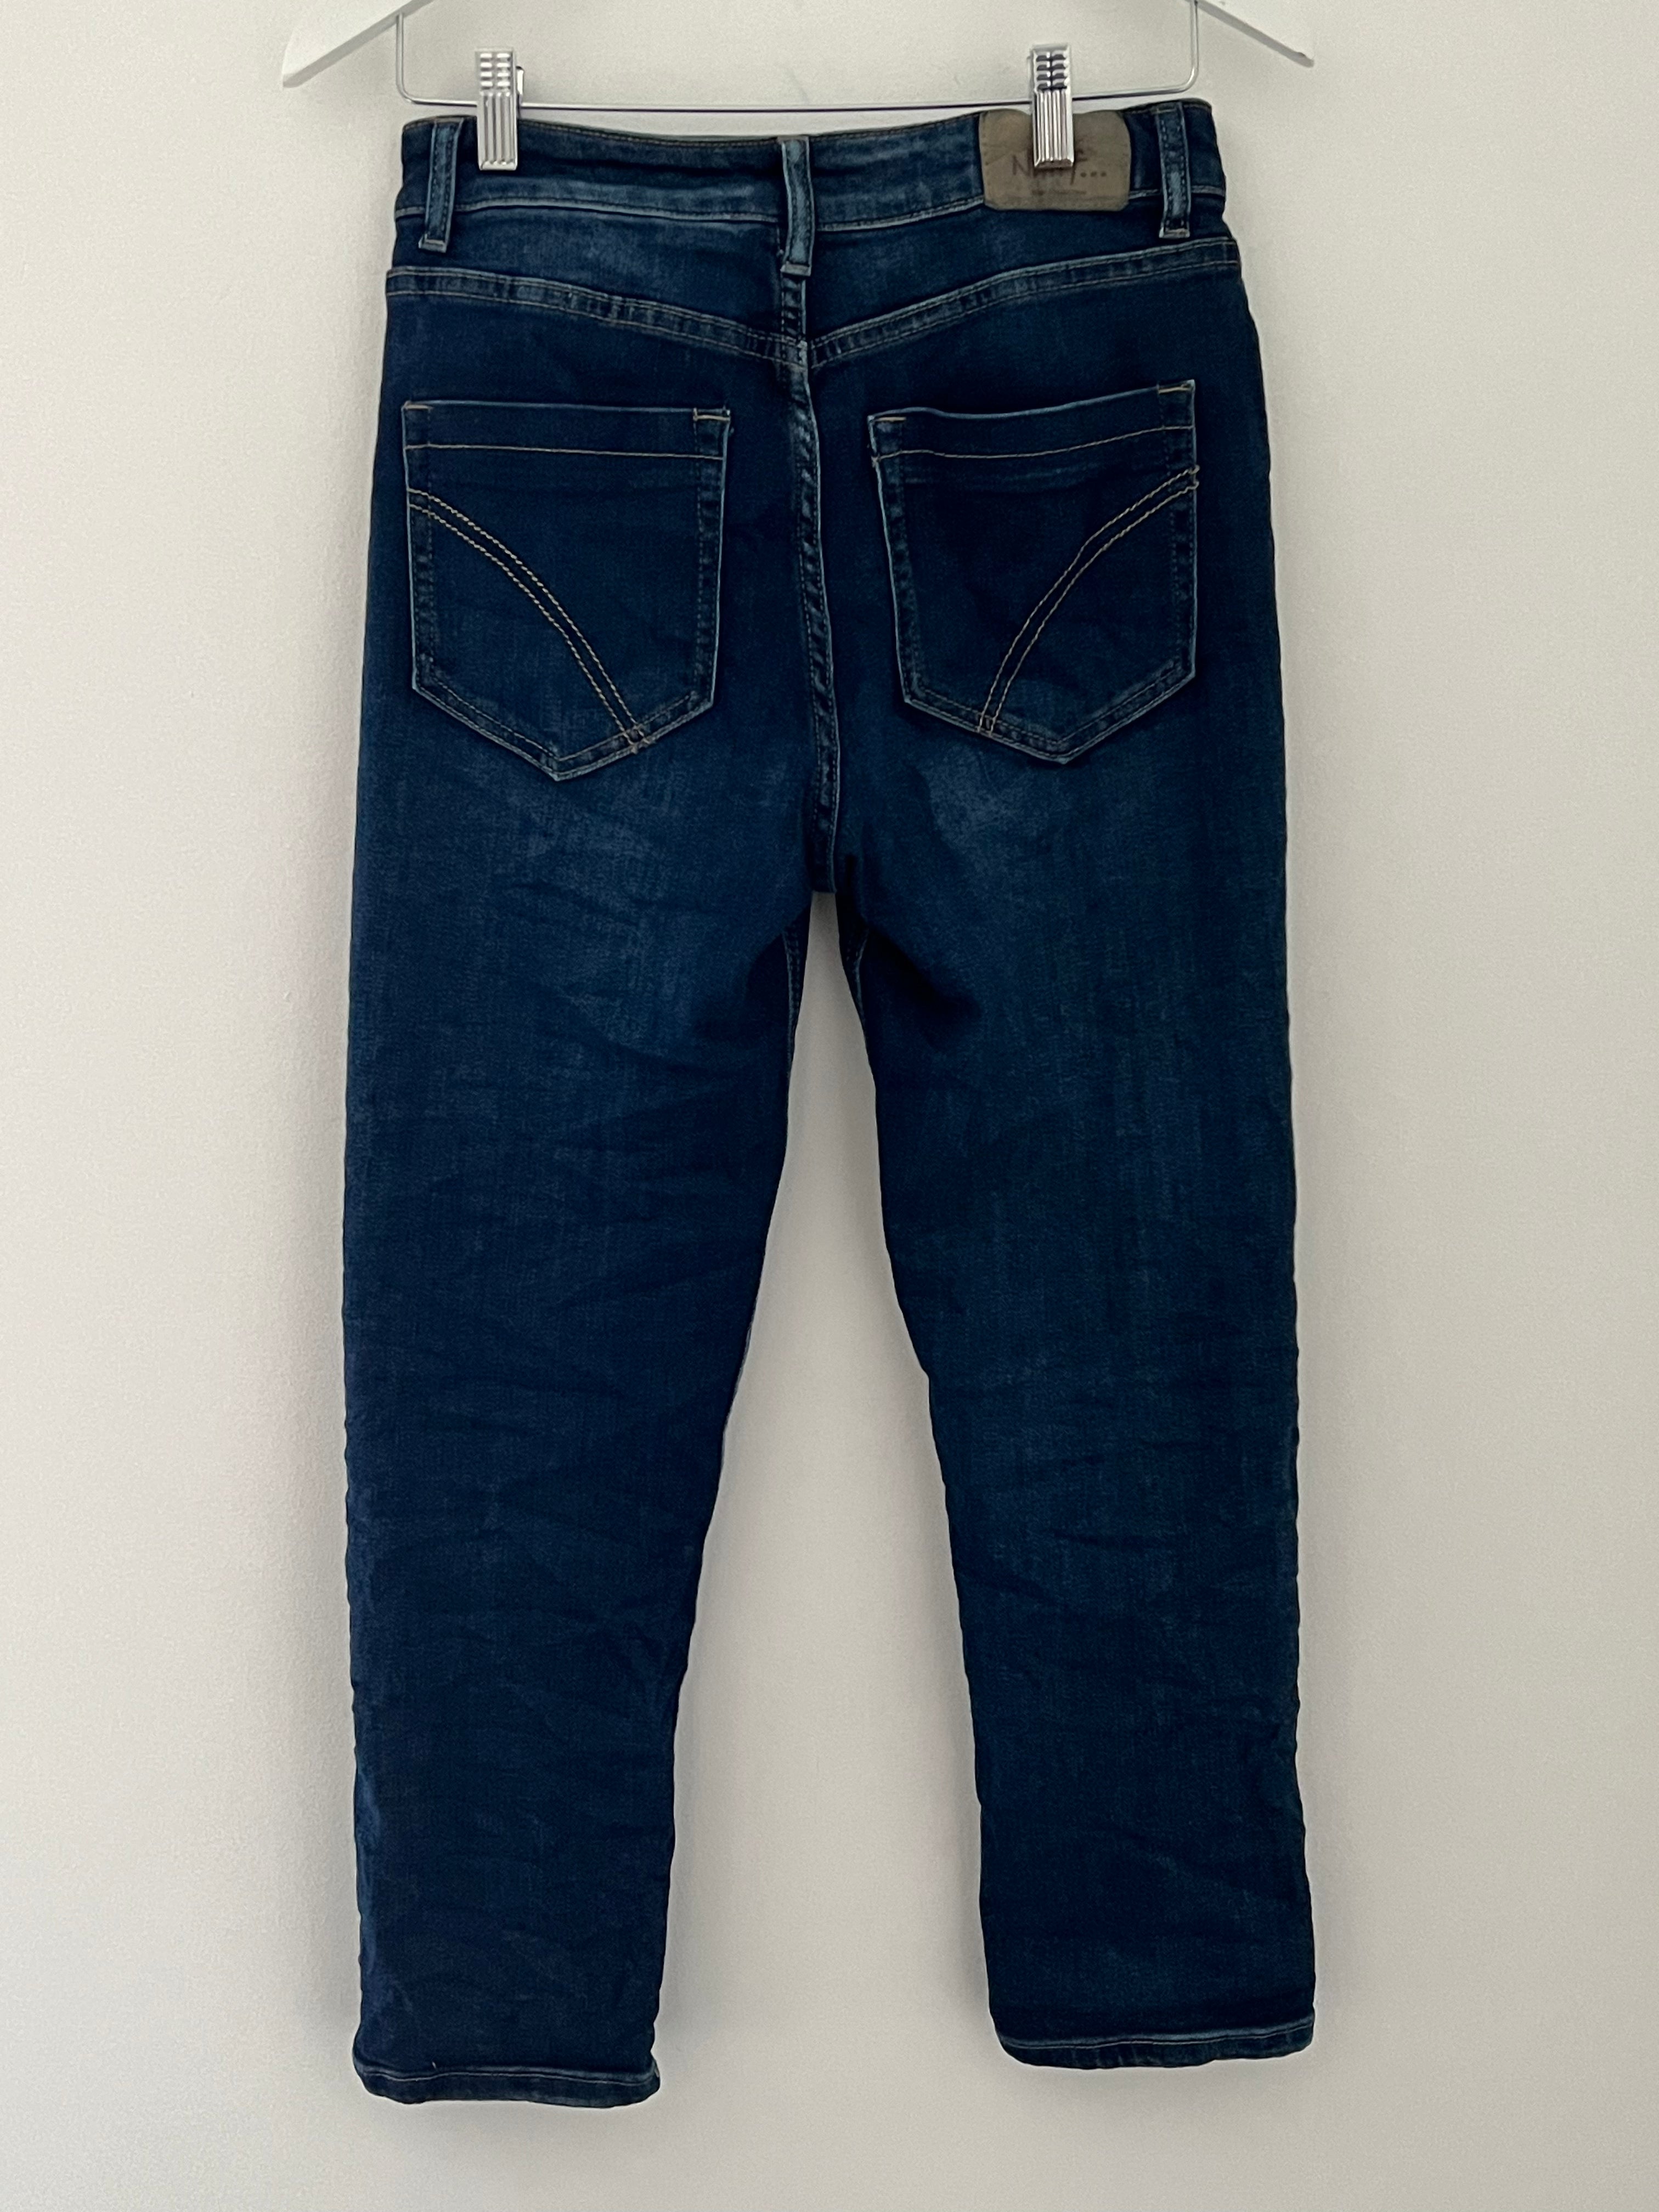 Decorative Button Fly Stretch Jeans in Denim